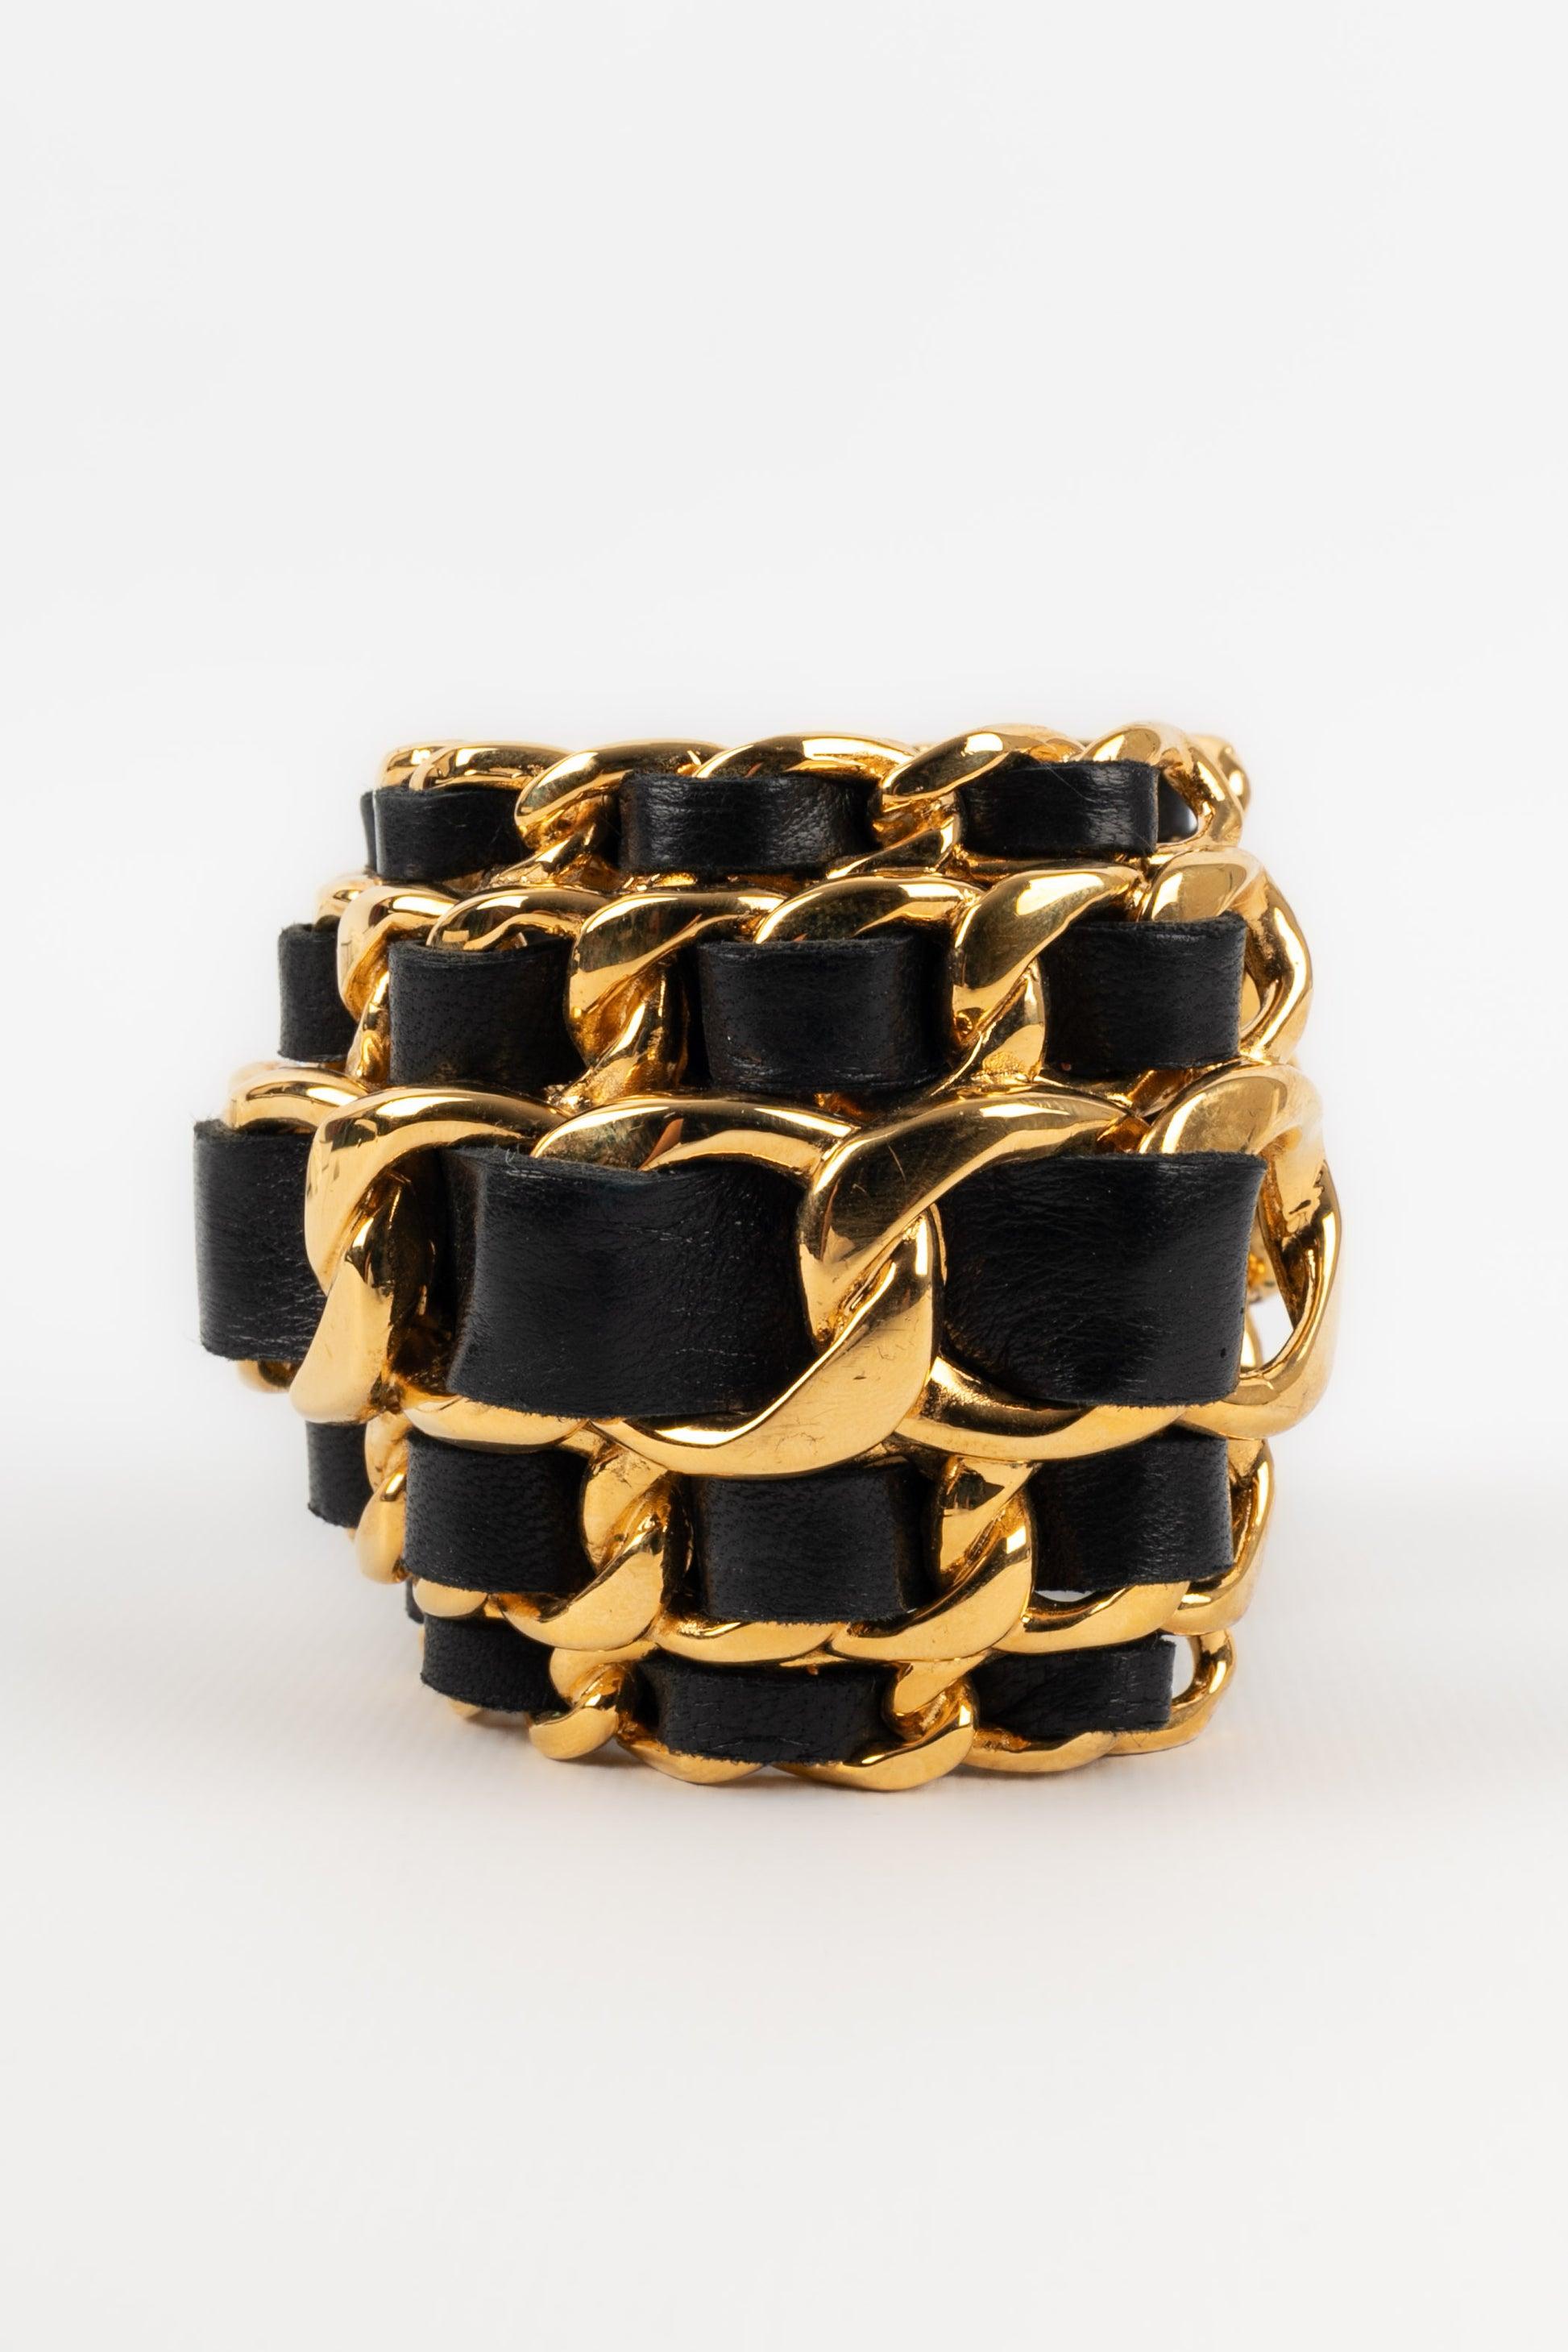 Women's Chanel Golden Metal and Leather Cuff Bracelet with Chains, 1991